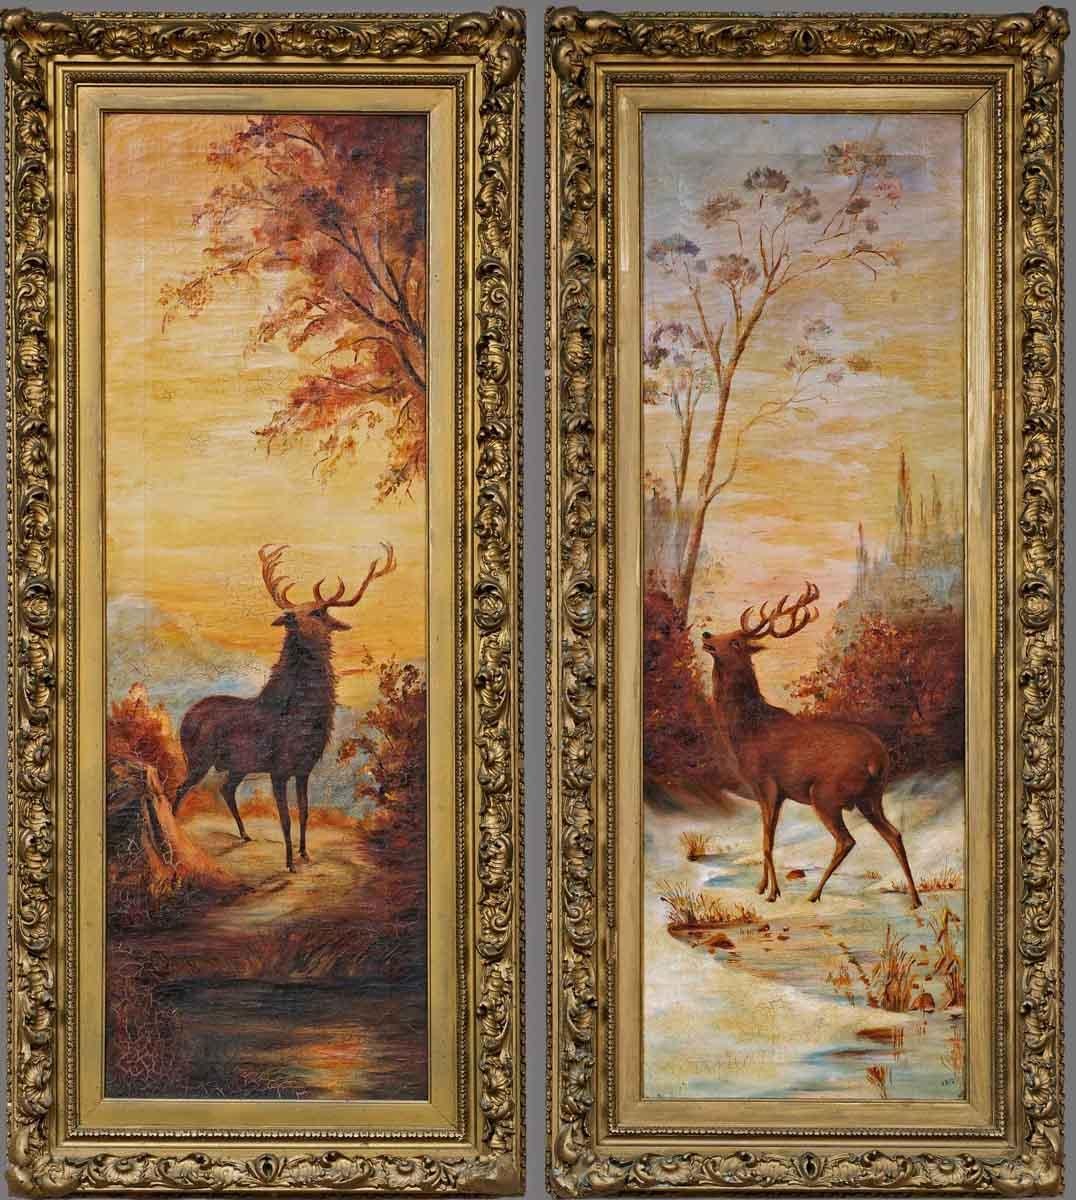 Unknown Landscape Painting - Two Stags in Winter Landscape, Twilight Oil on Canvas, Dated 1912